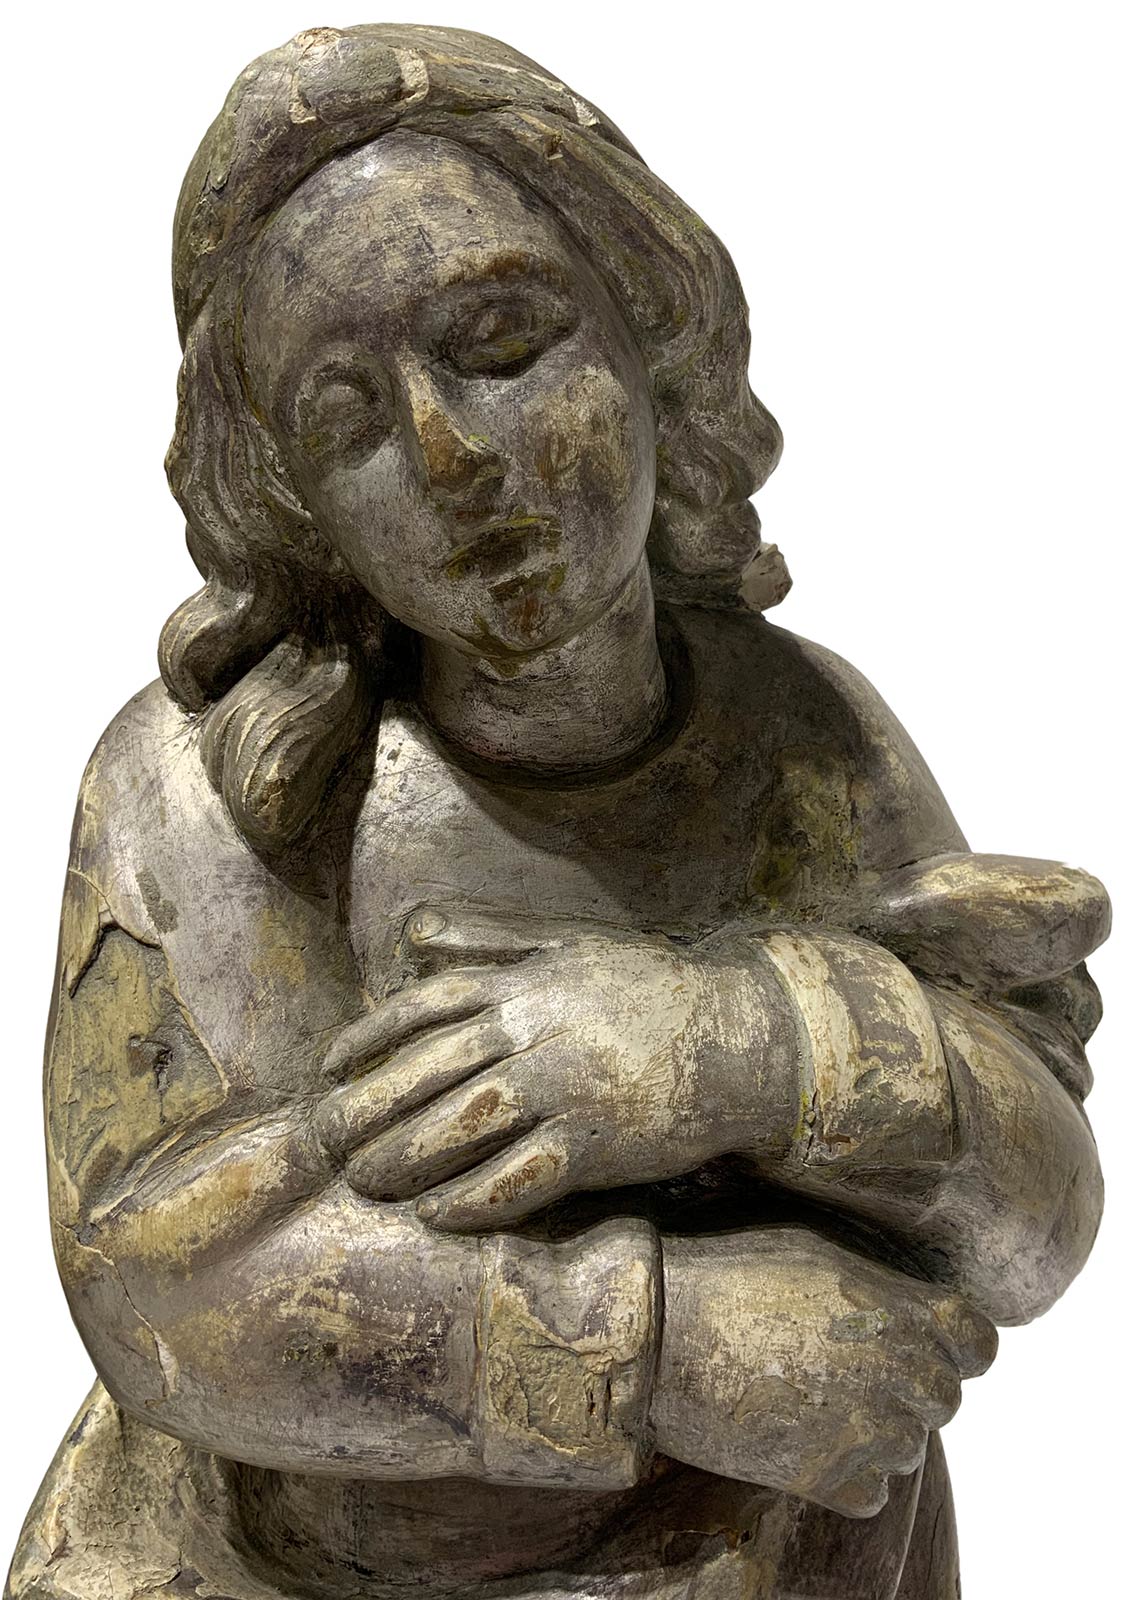 Wooden statue depicting a young St. Agatha, the seventeenth century, worked with silver leaf. H cm - Image 2 of 4